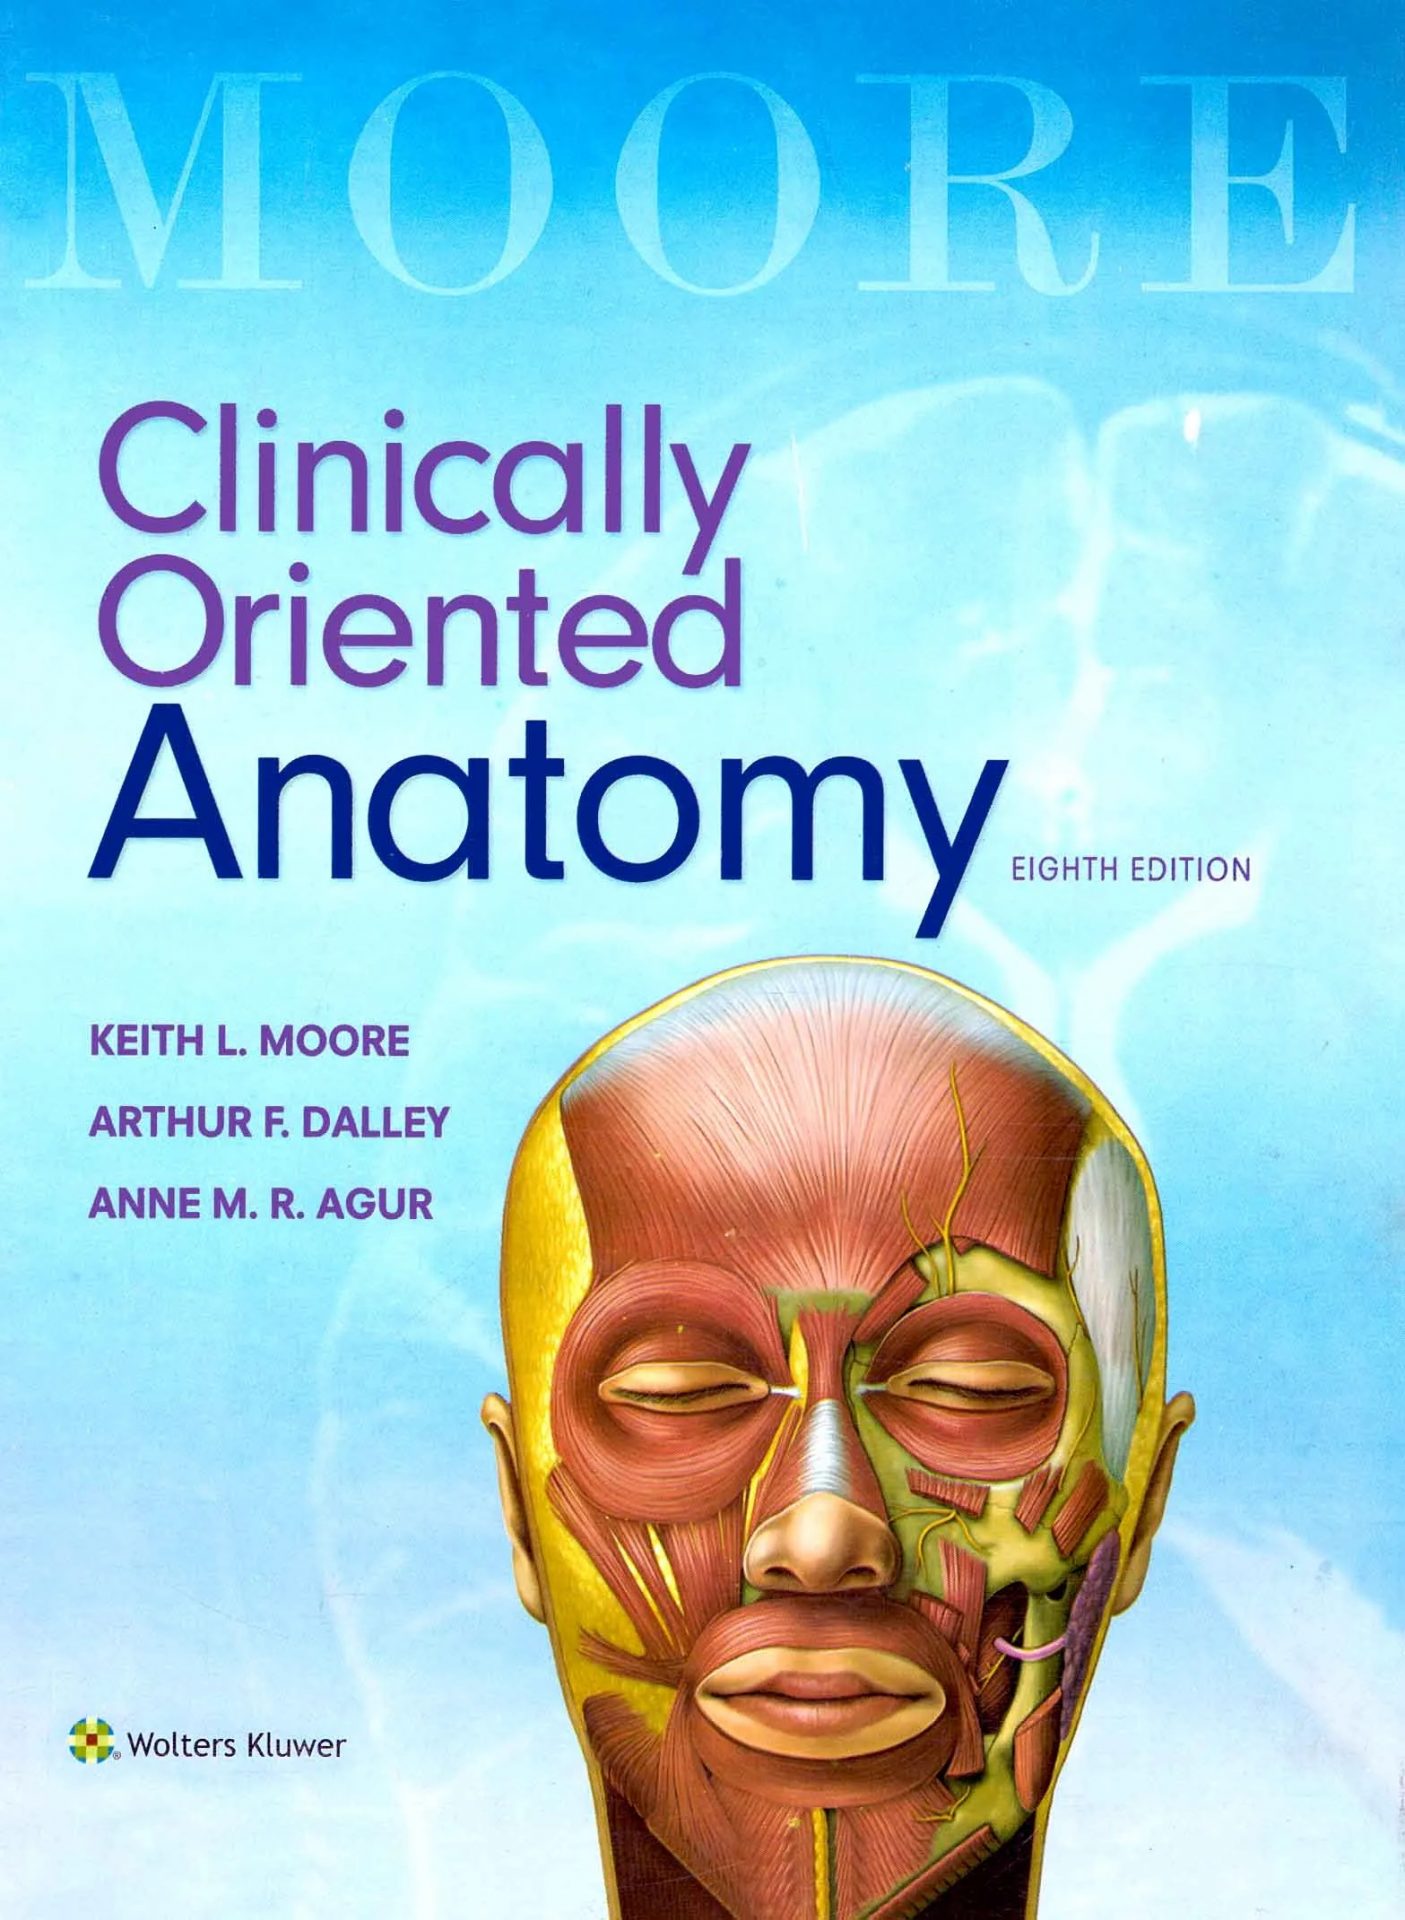 MOORE’S ESSENTIAL CLINICAL ANATOMY 8th EDITION PDF Free Download